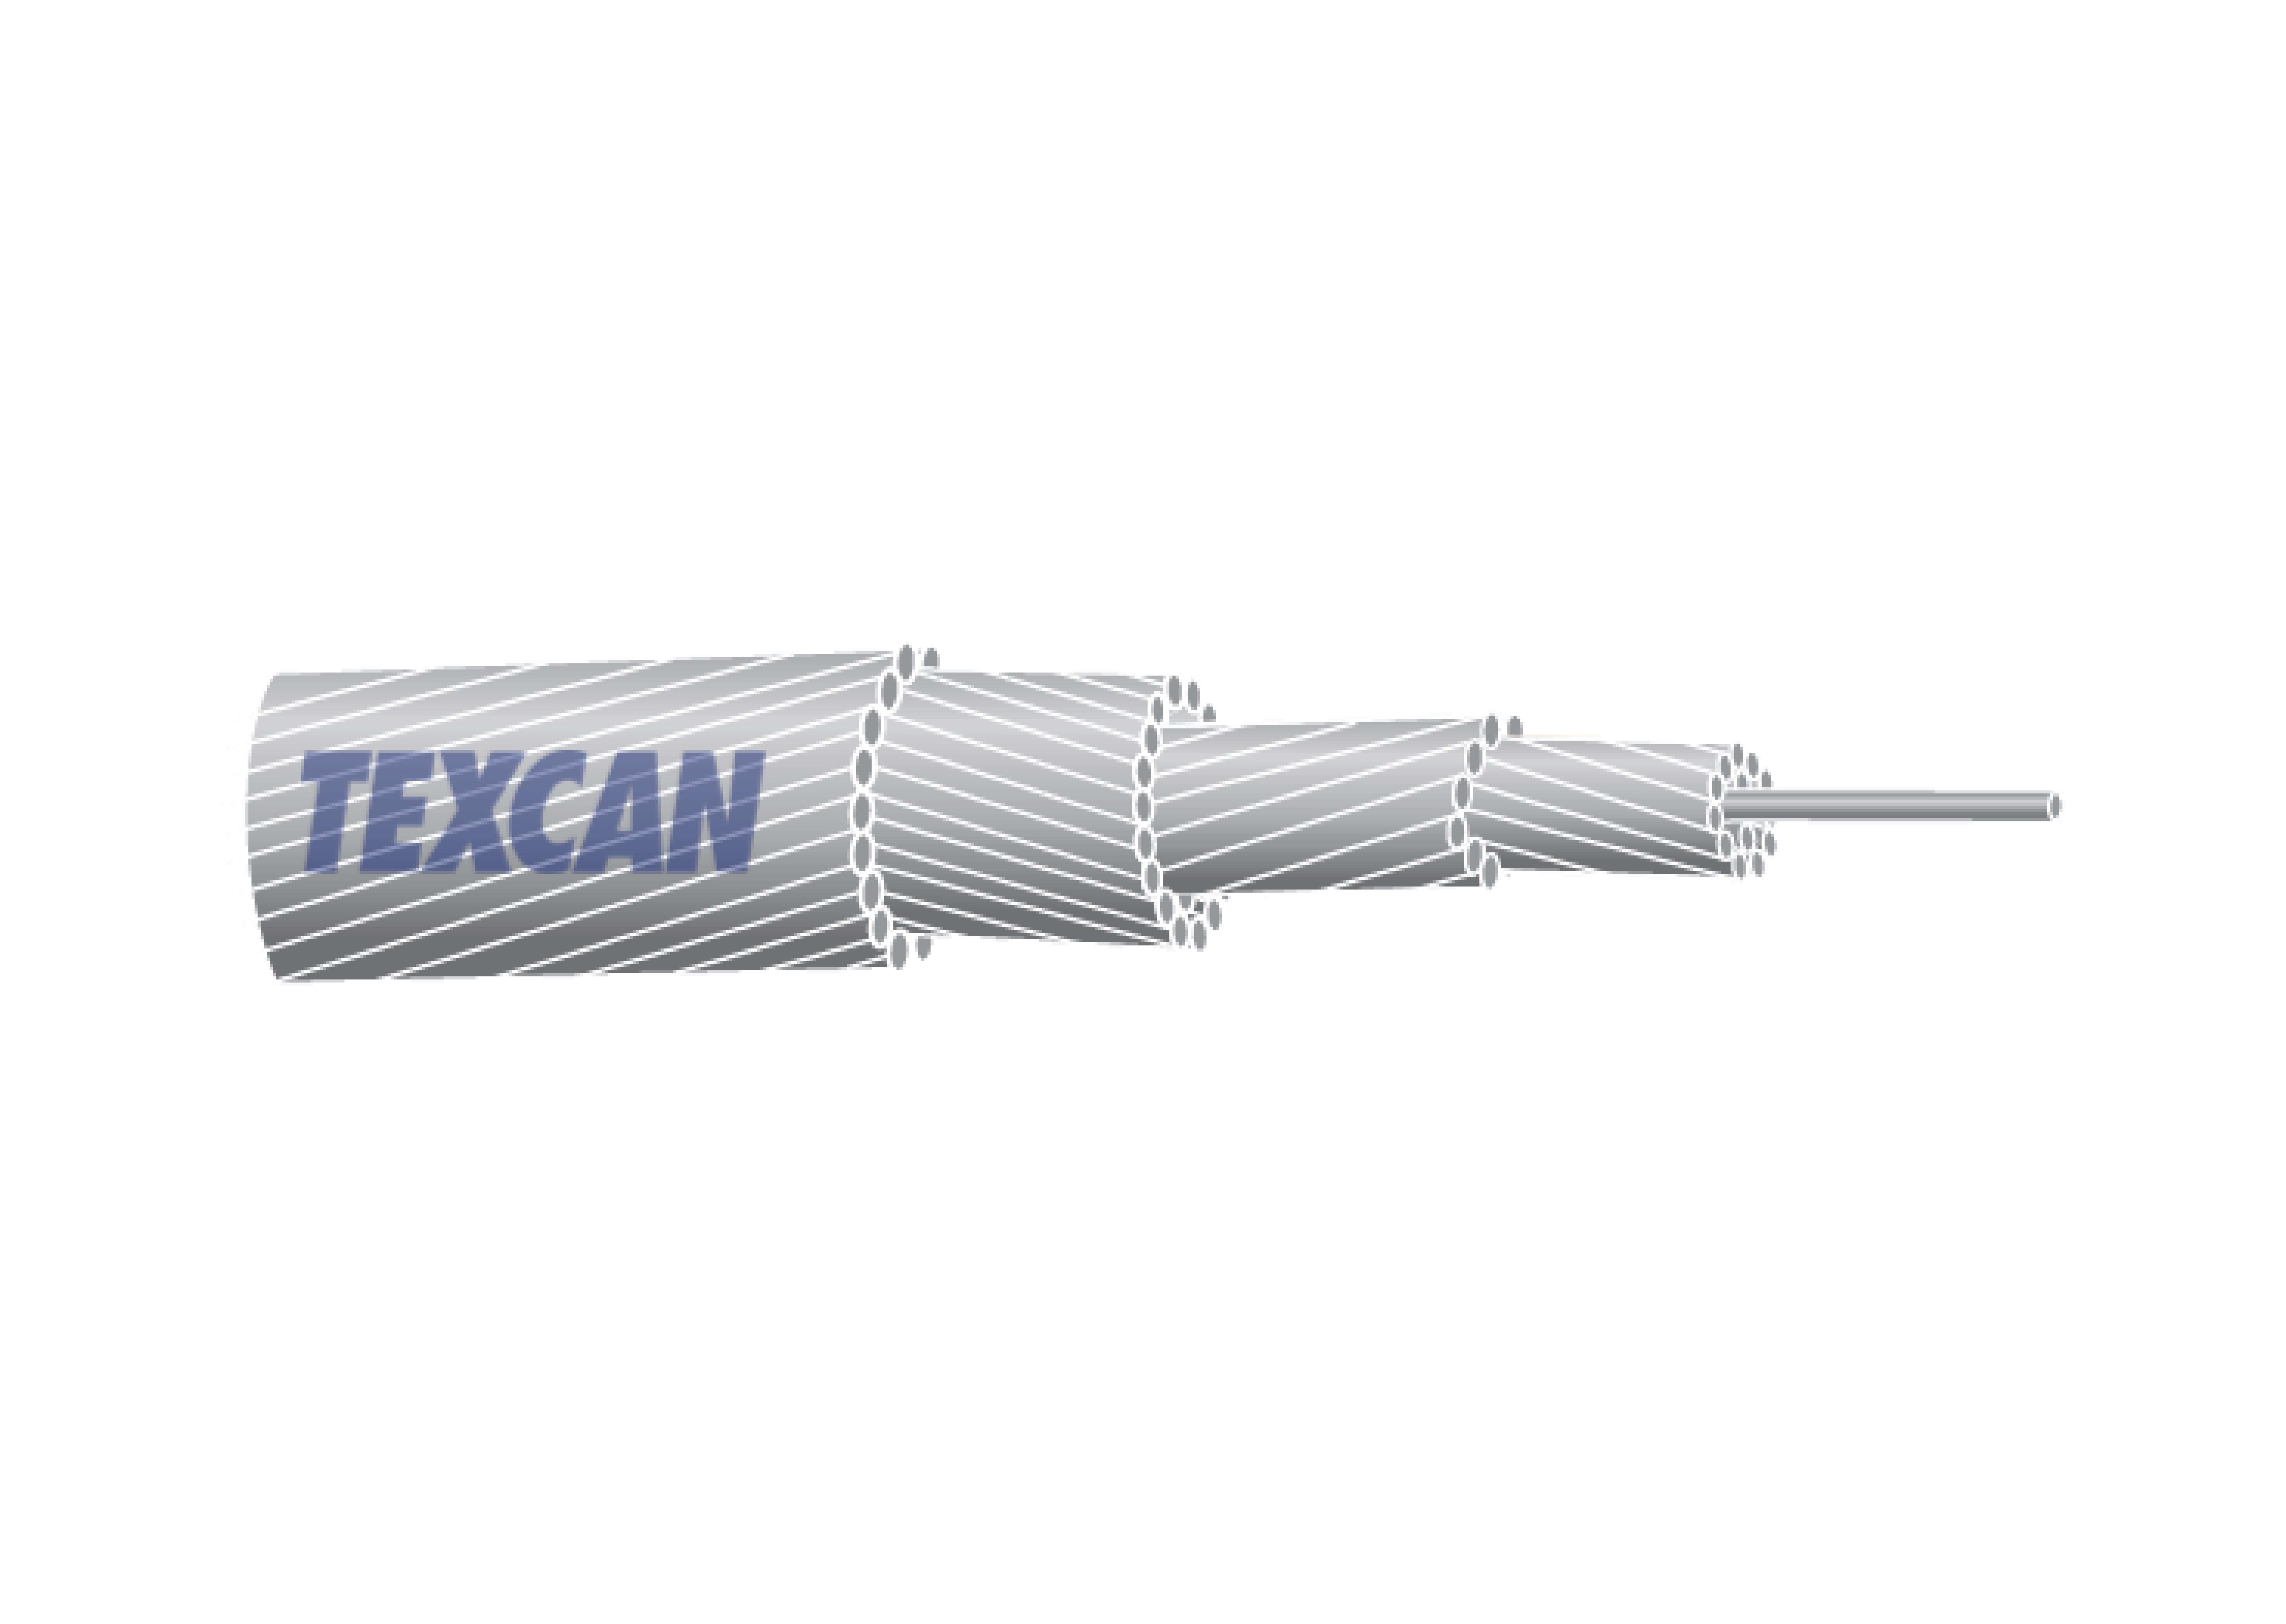 Texcan - Landing Pages - Southwire - Utility Cables.jpg